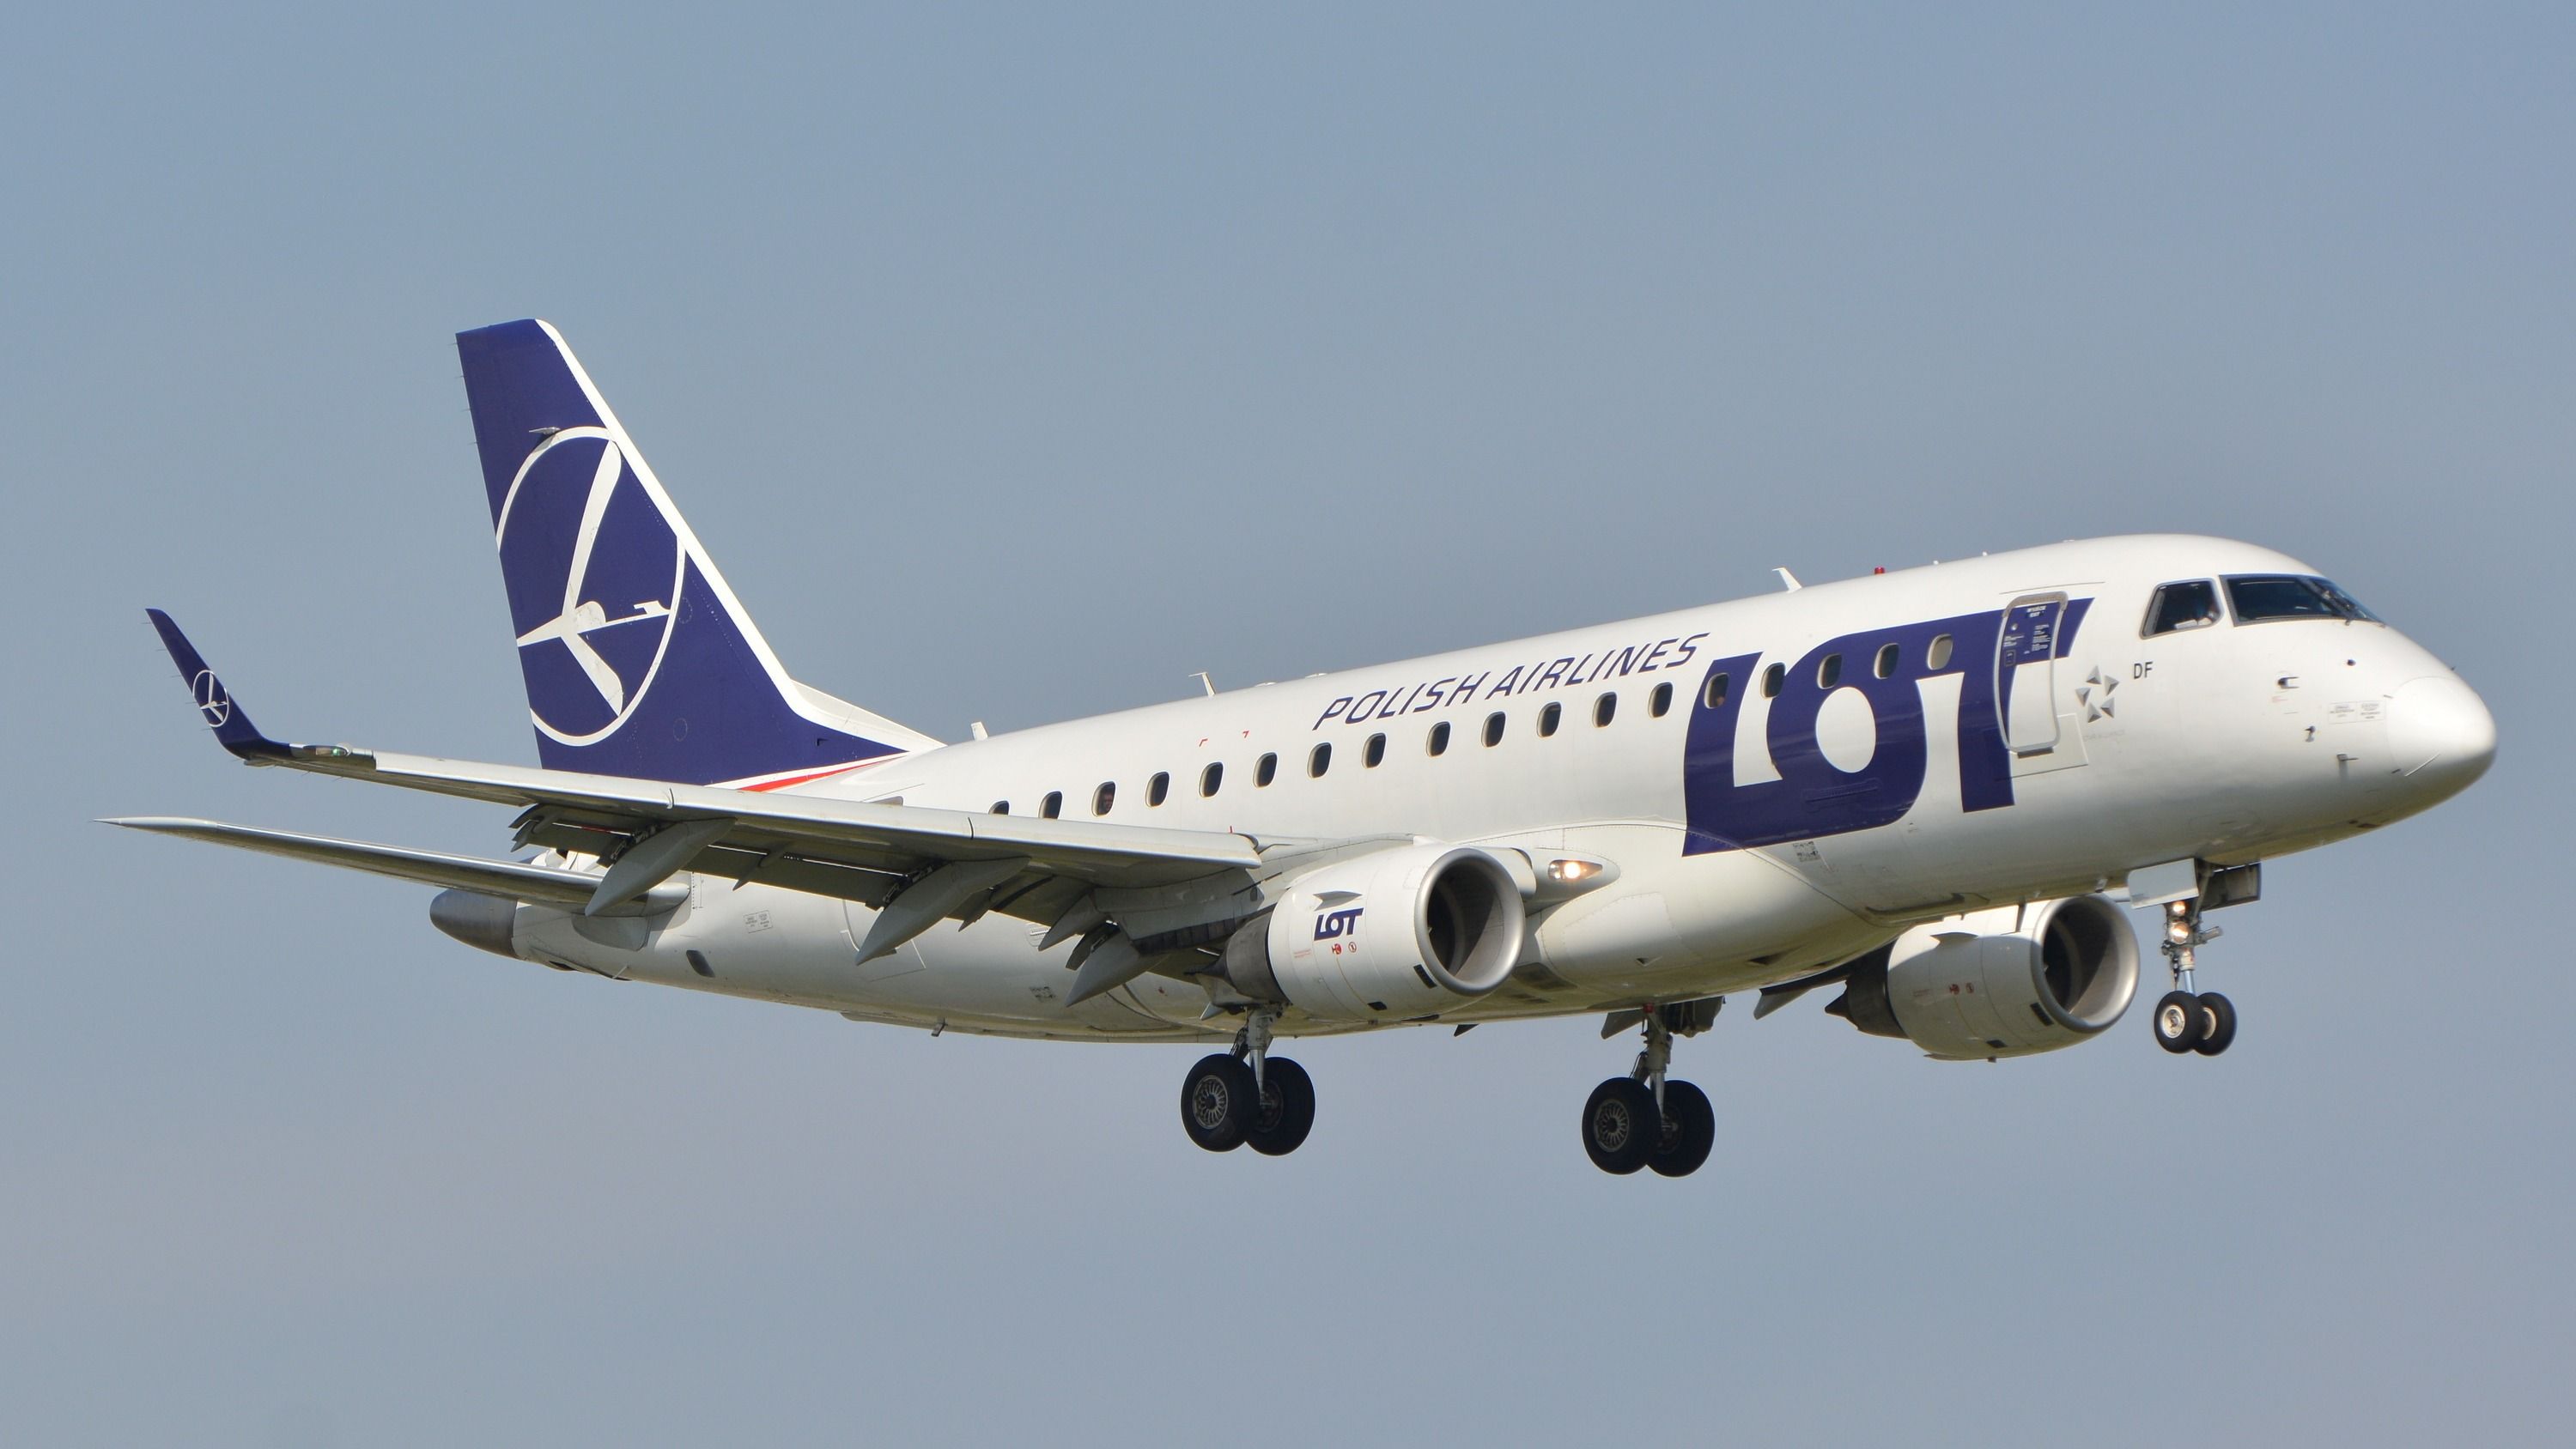 A LOT Polish Airlines Embraer E175 about to land.